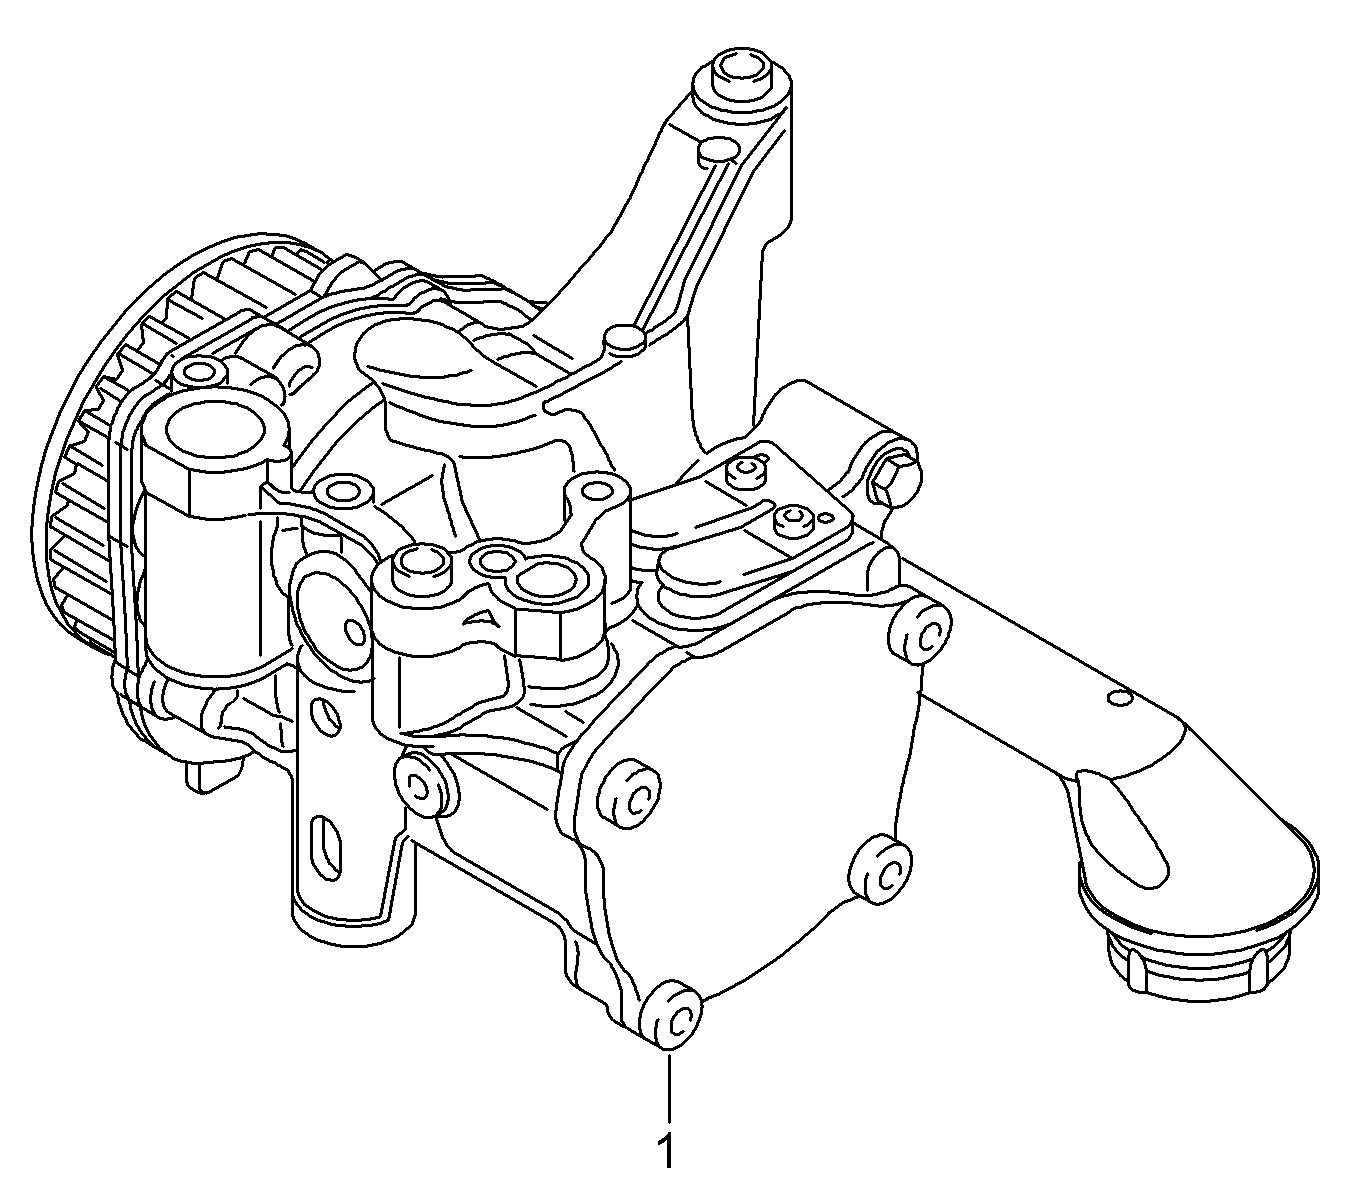 Oil pump with integrated<br>vacuum pump 2.0 Ltr. - Beetle - be